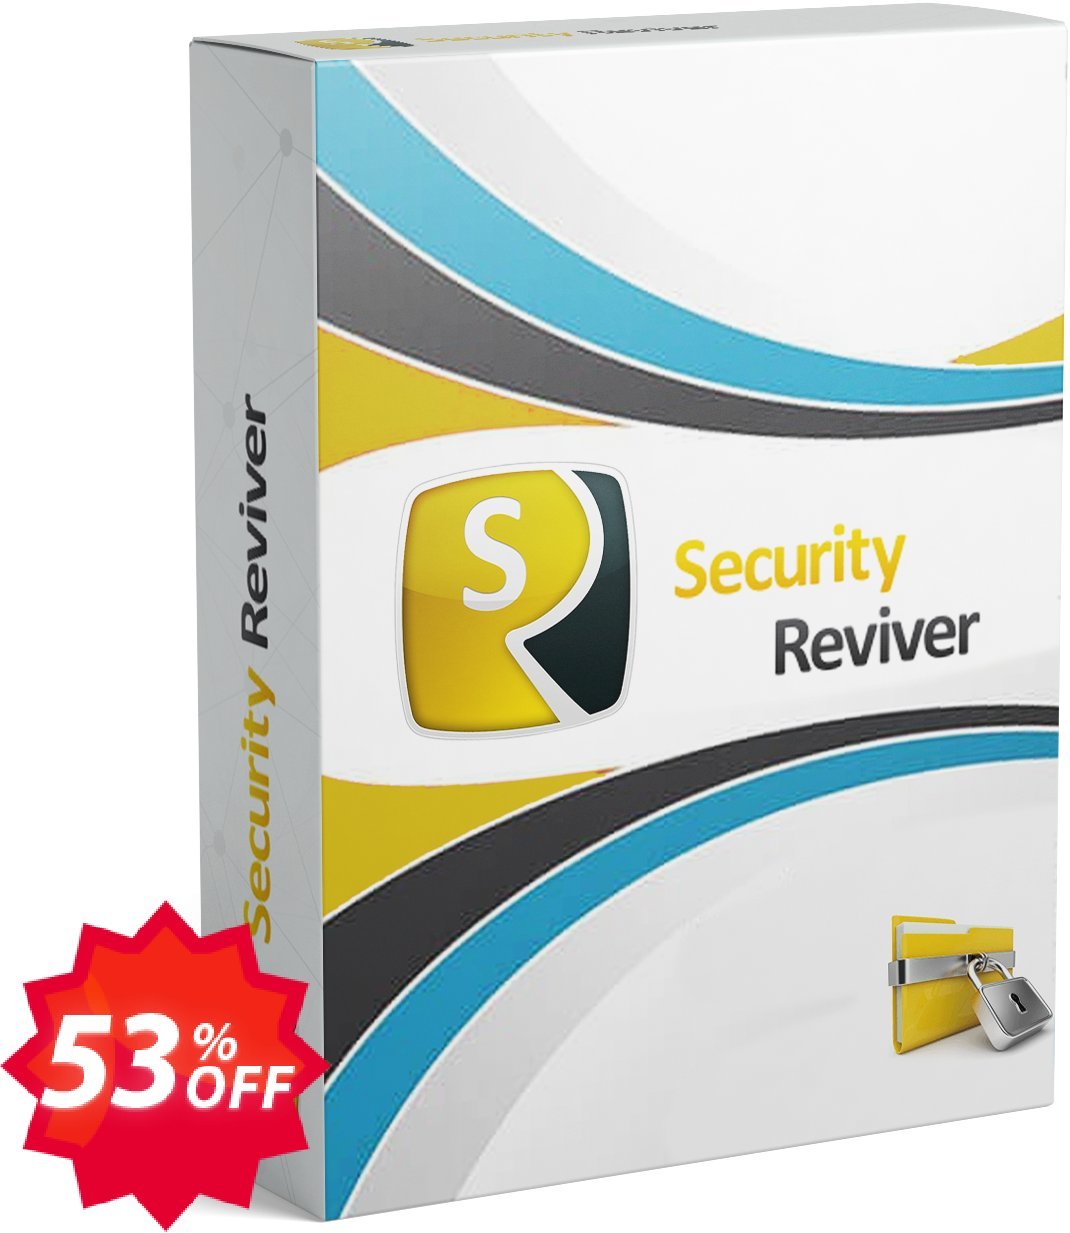 Security Reviver Coupon code 53% discount 